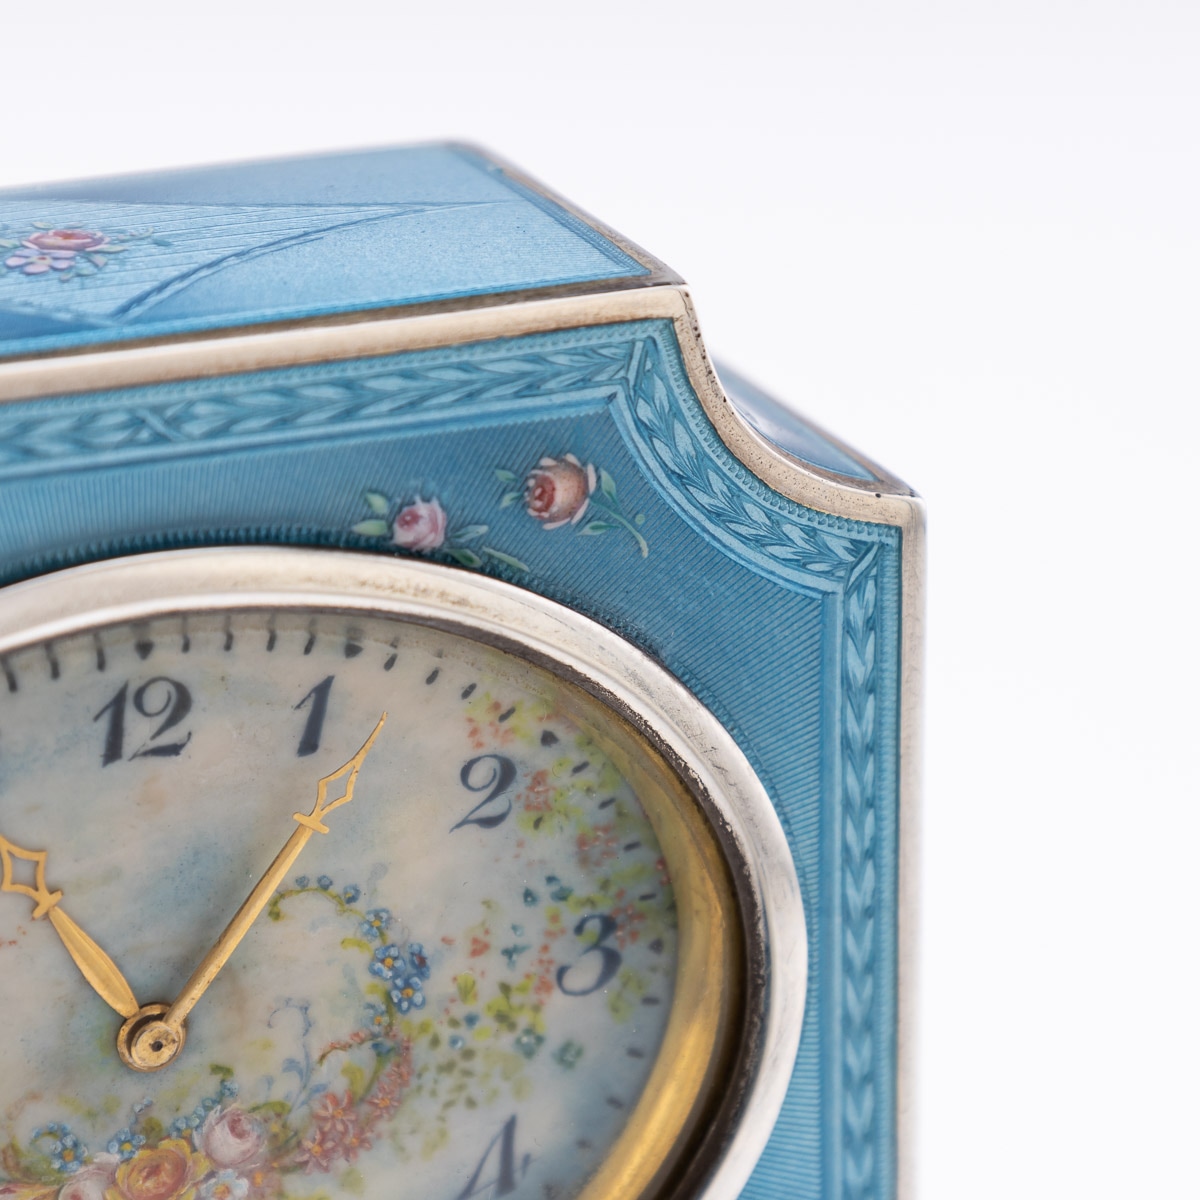 A FINE EARLY 20TH CENTURY SWISS SOLID SILVER AND GUILLOCHE ENAMEL TRAVEL CLOCK IN DISPLAY CASE - Image 41 of 62